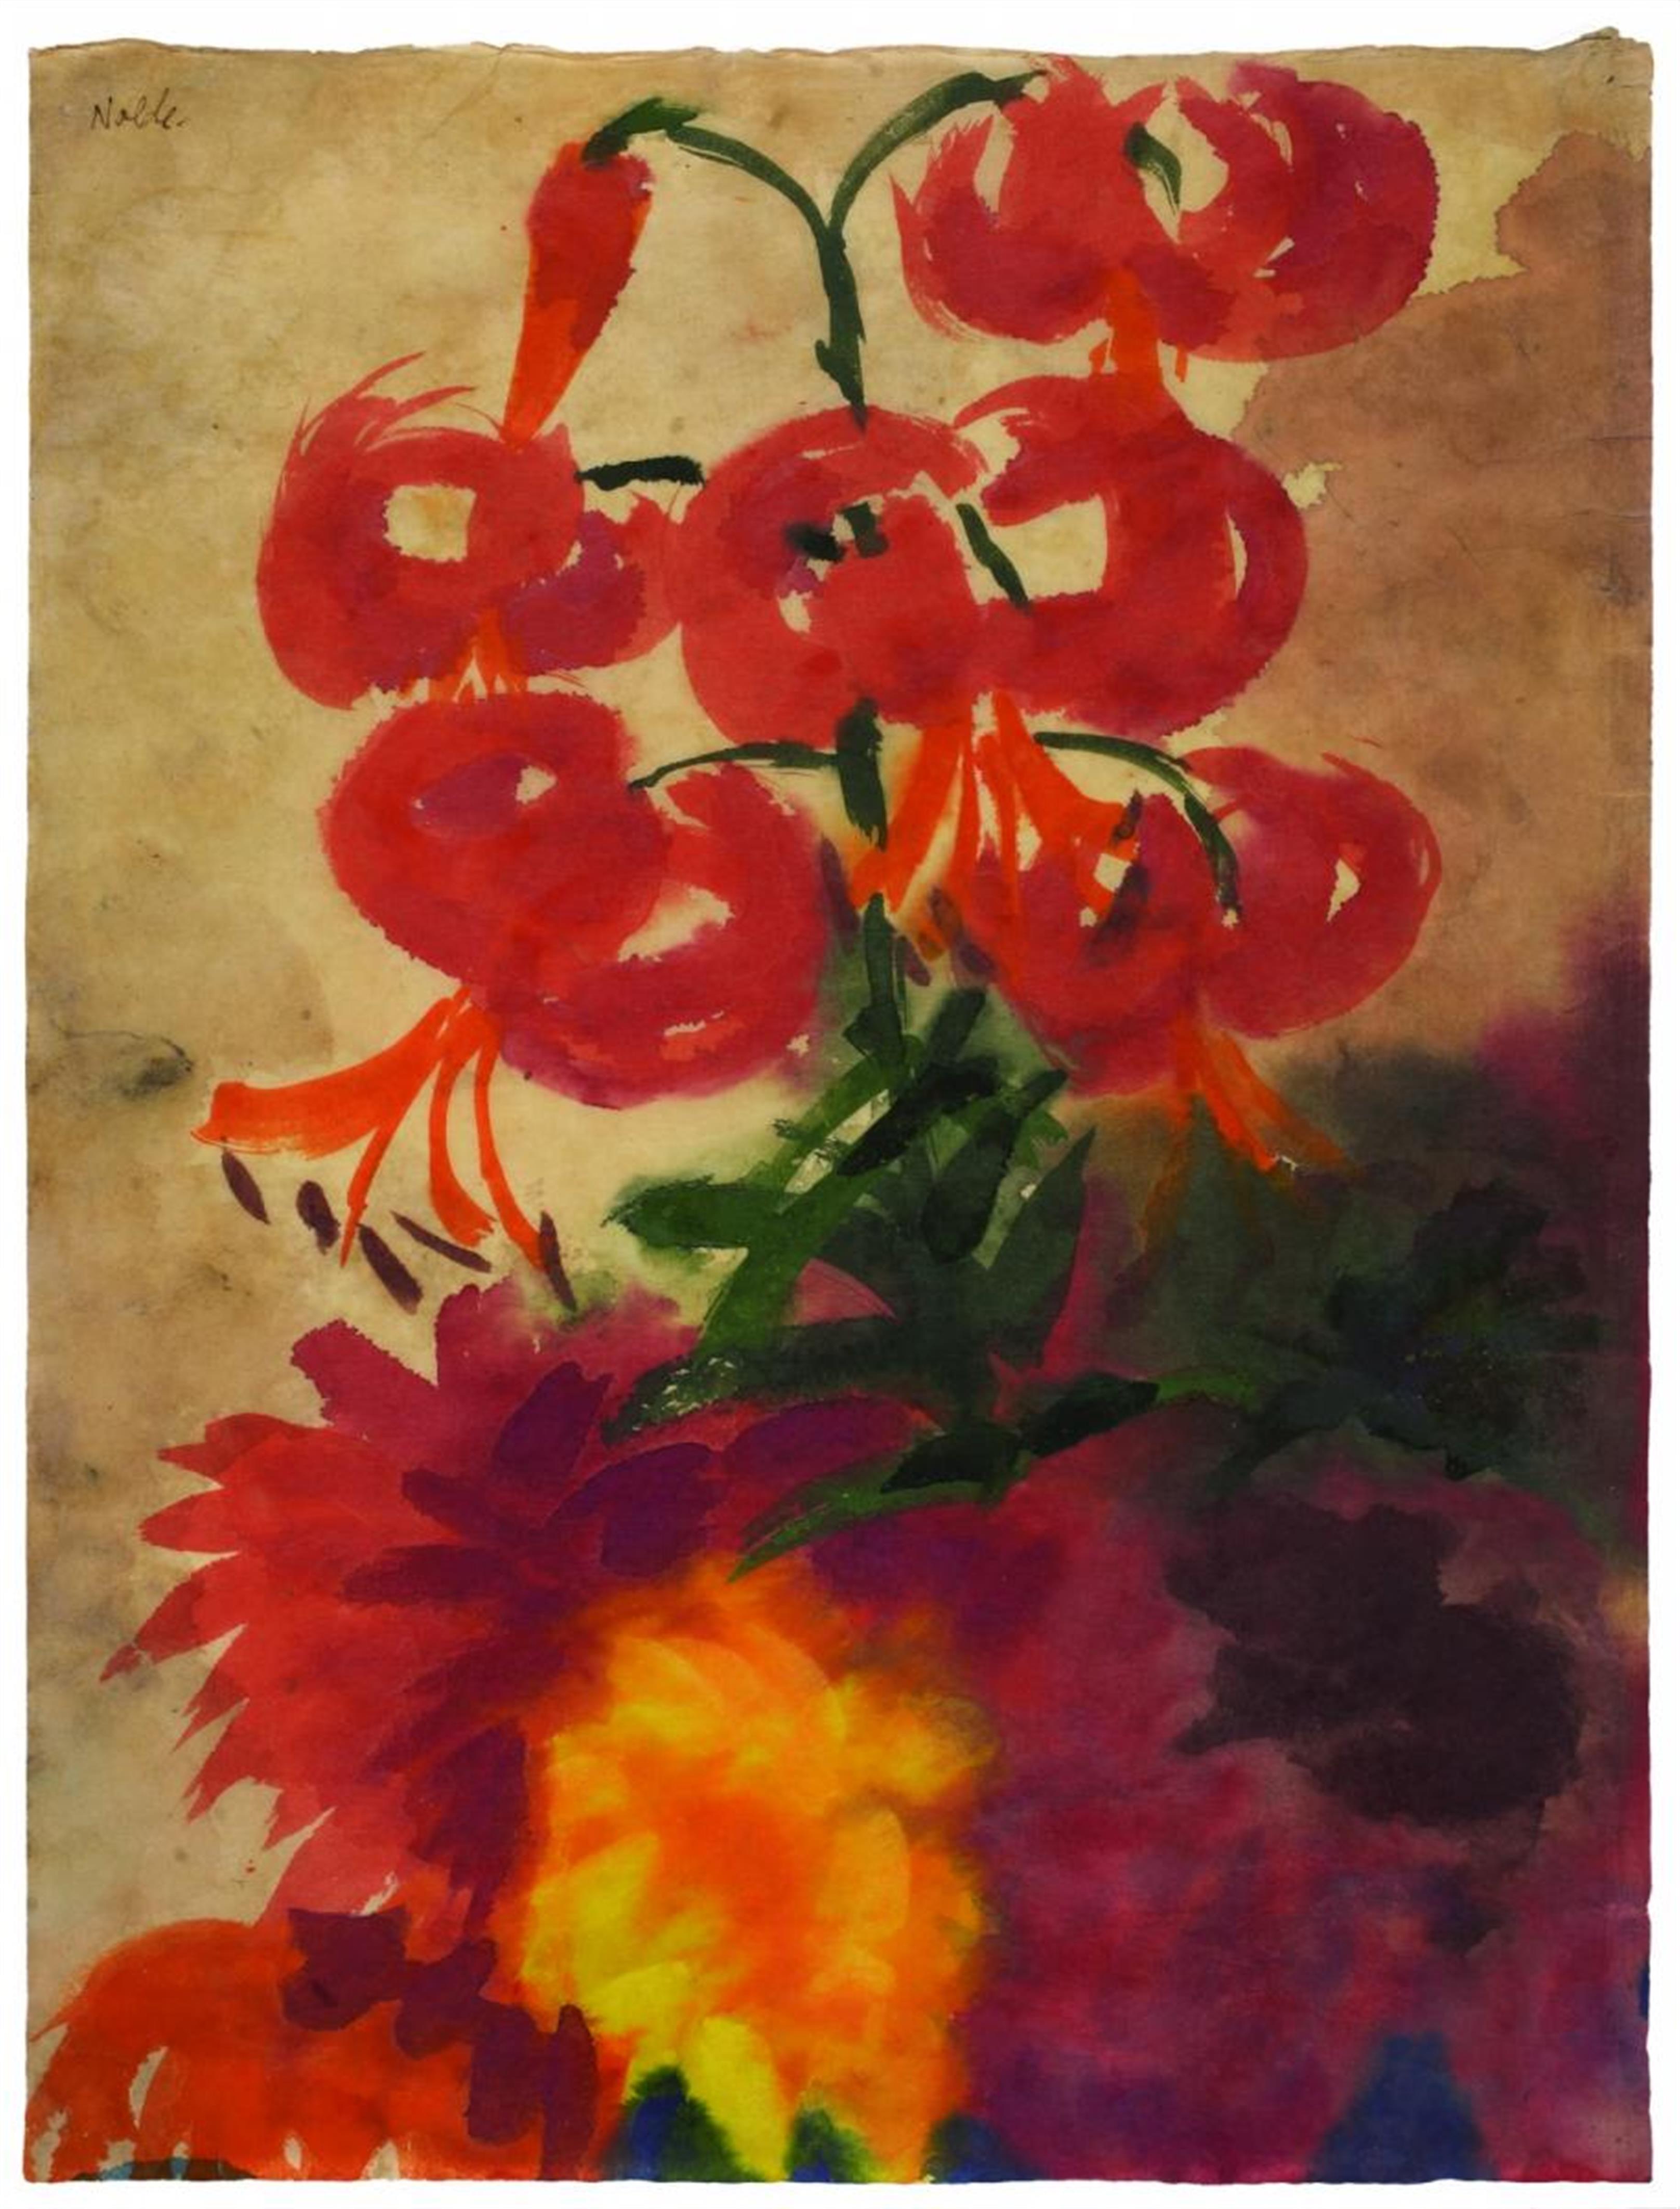 Emil Nolde - Rote Dahlien und Feuerlilie (Red Dahlias and Tiger Lily) - image-1